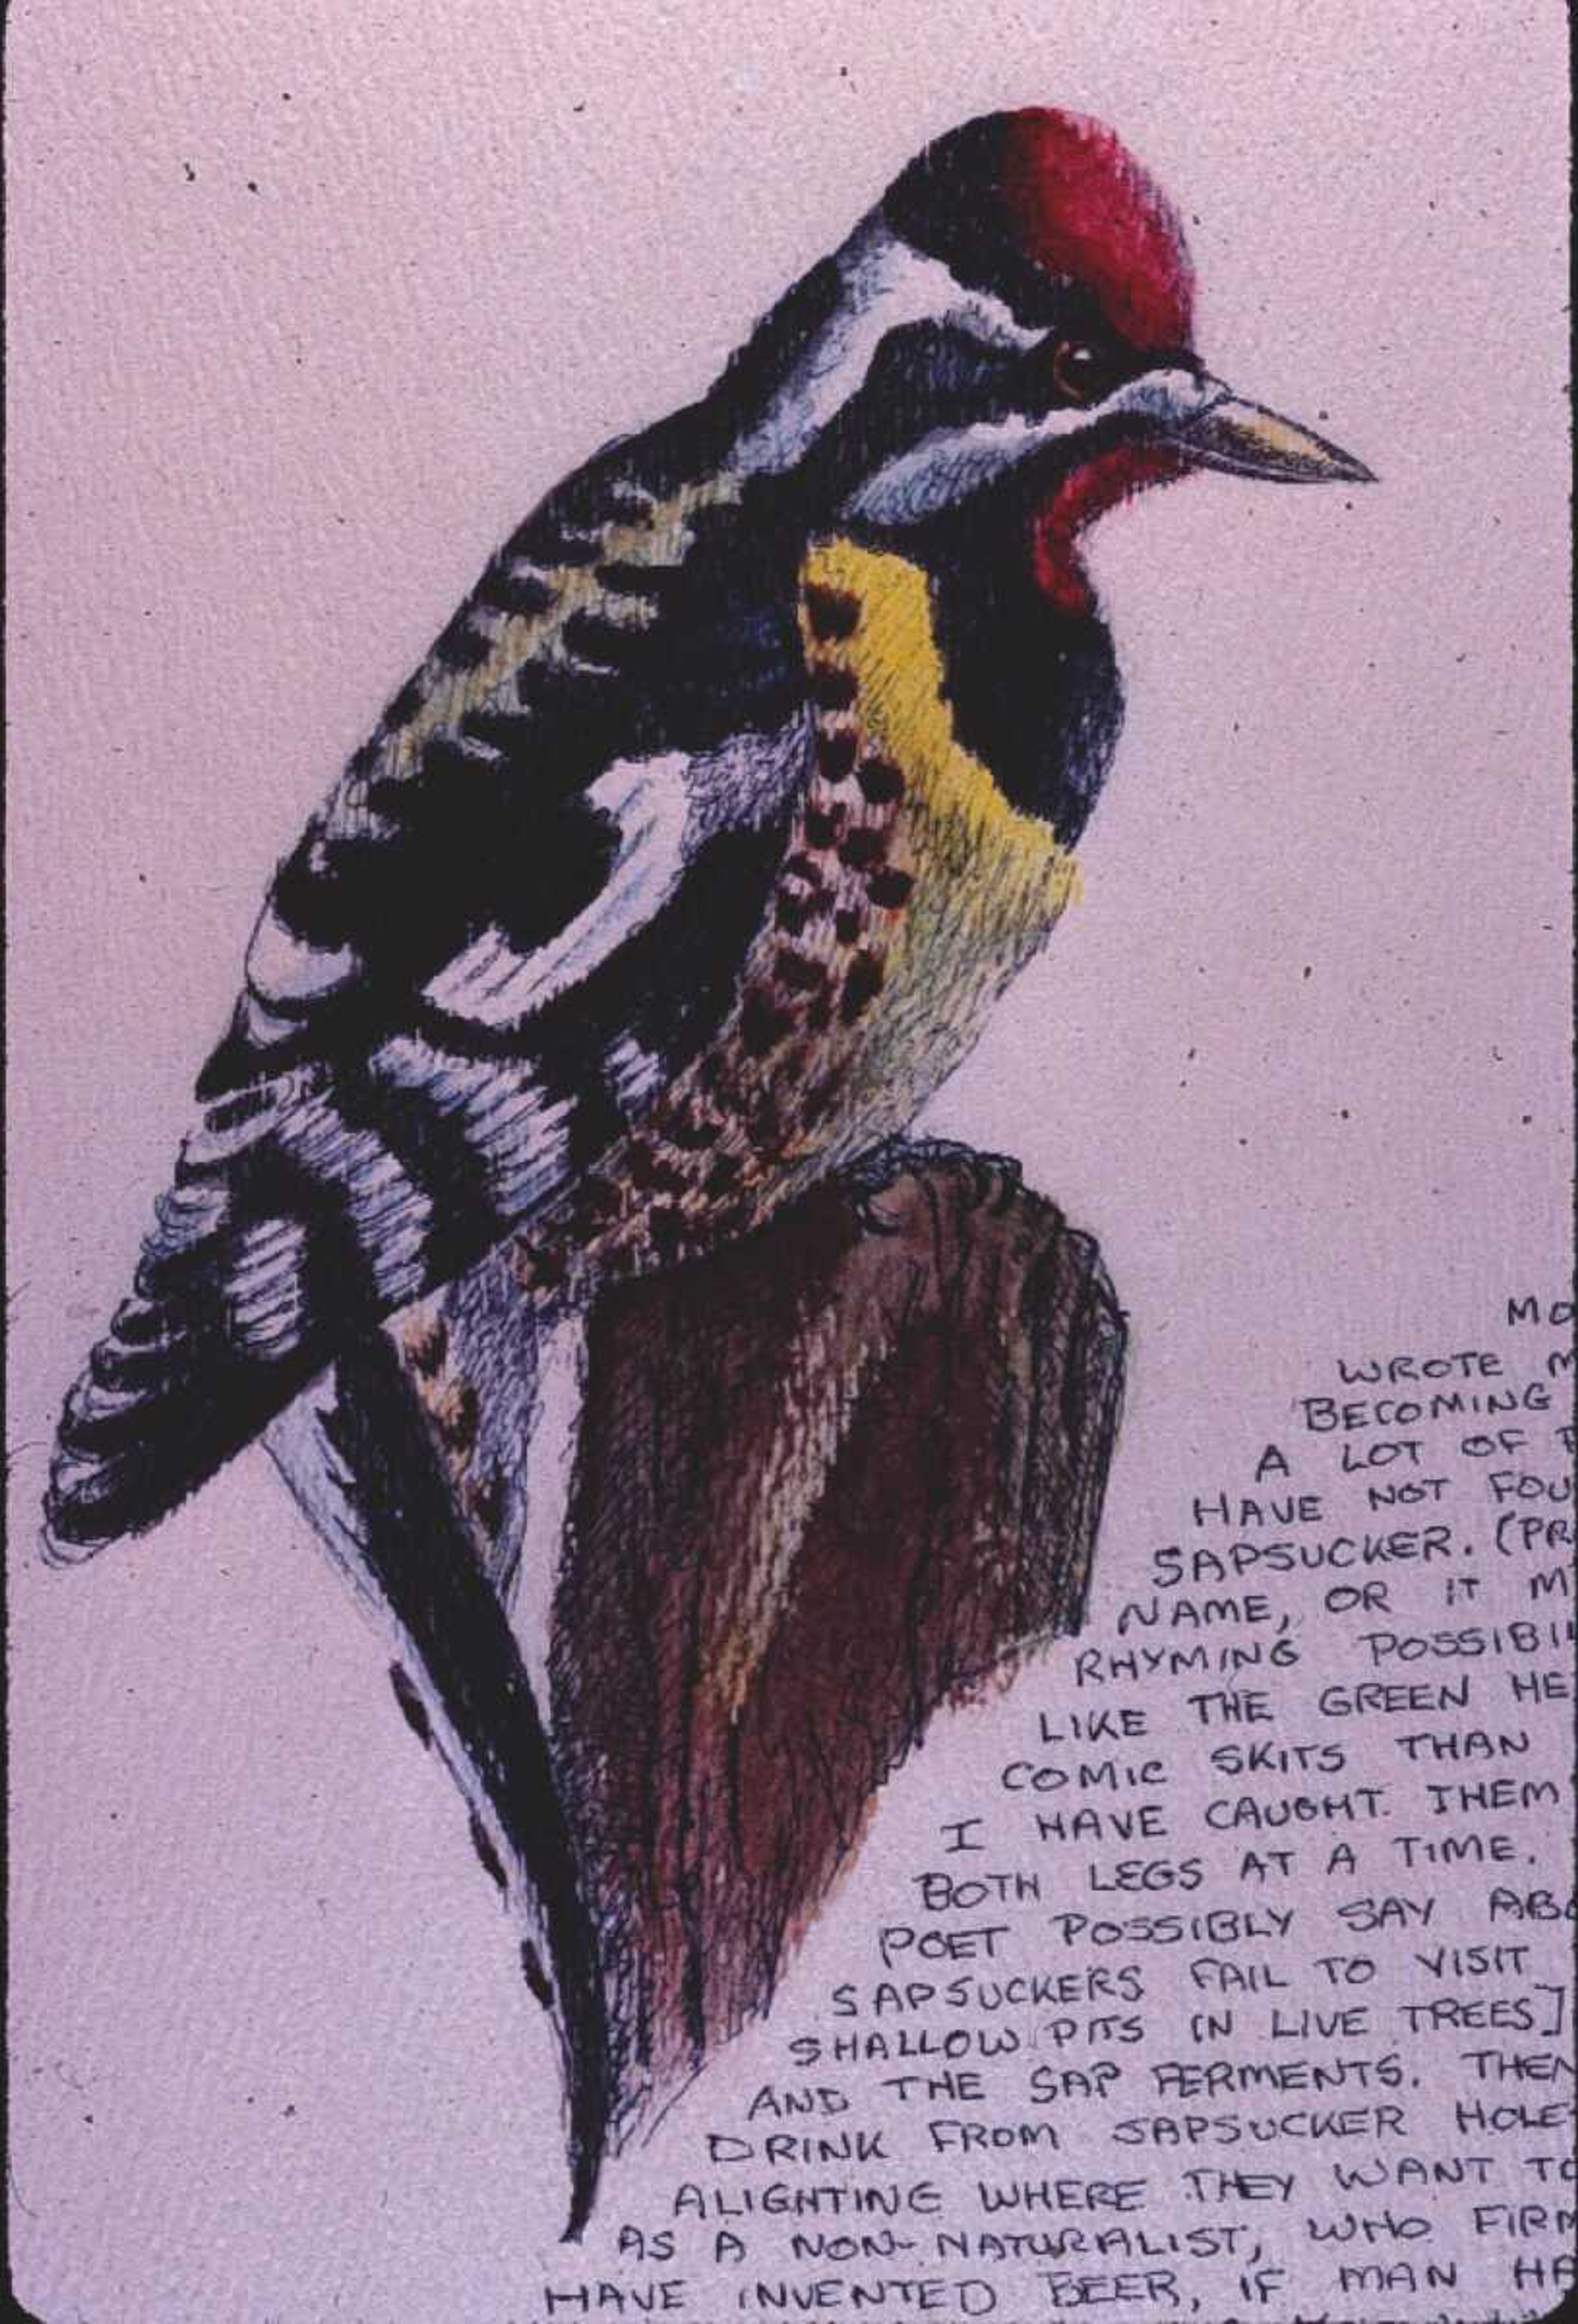 Above is a copy of a yellow-bellied sapsucker drawn by Jim Hamby.